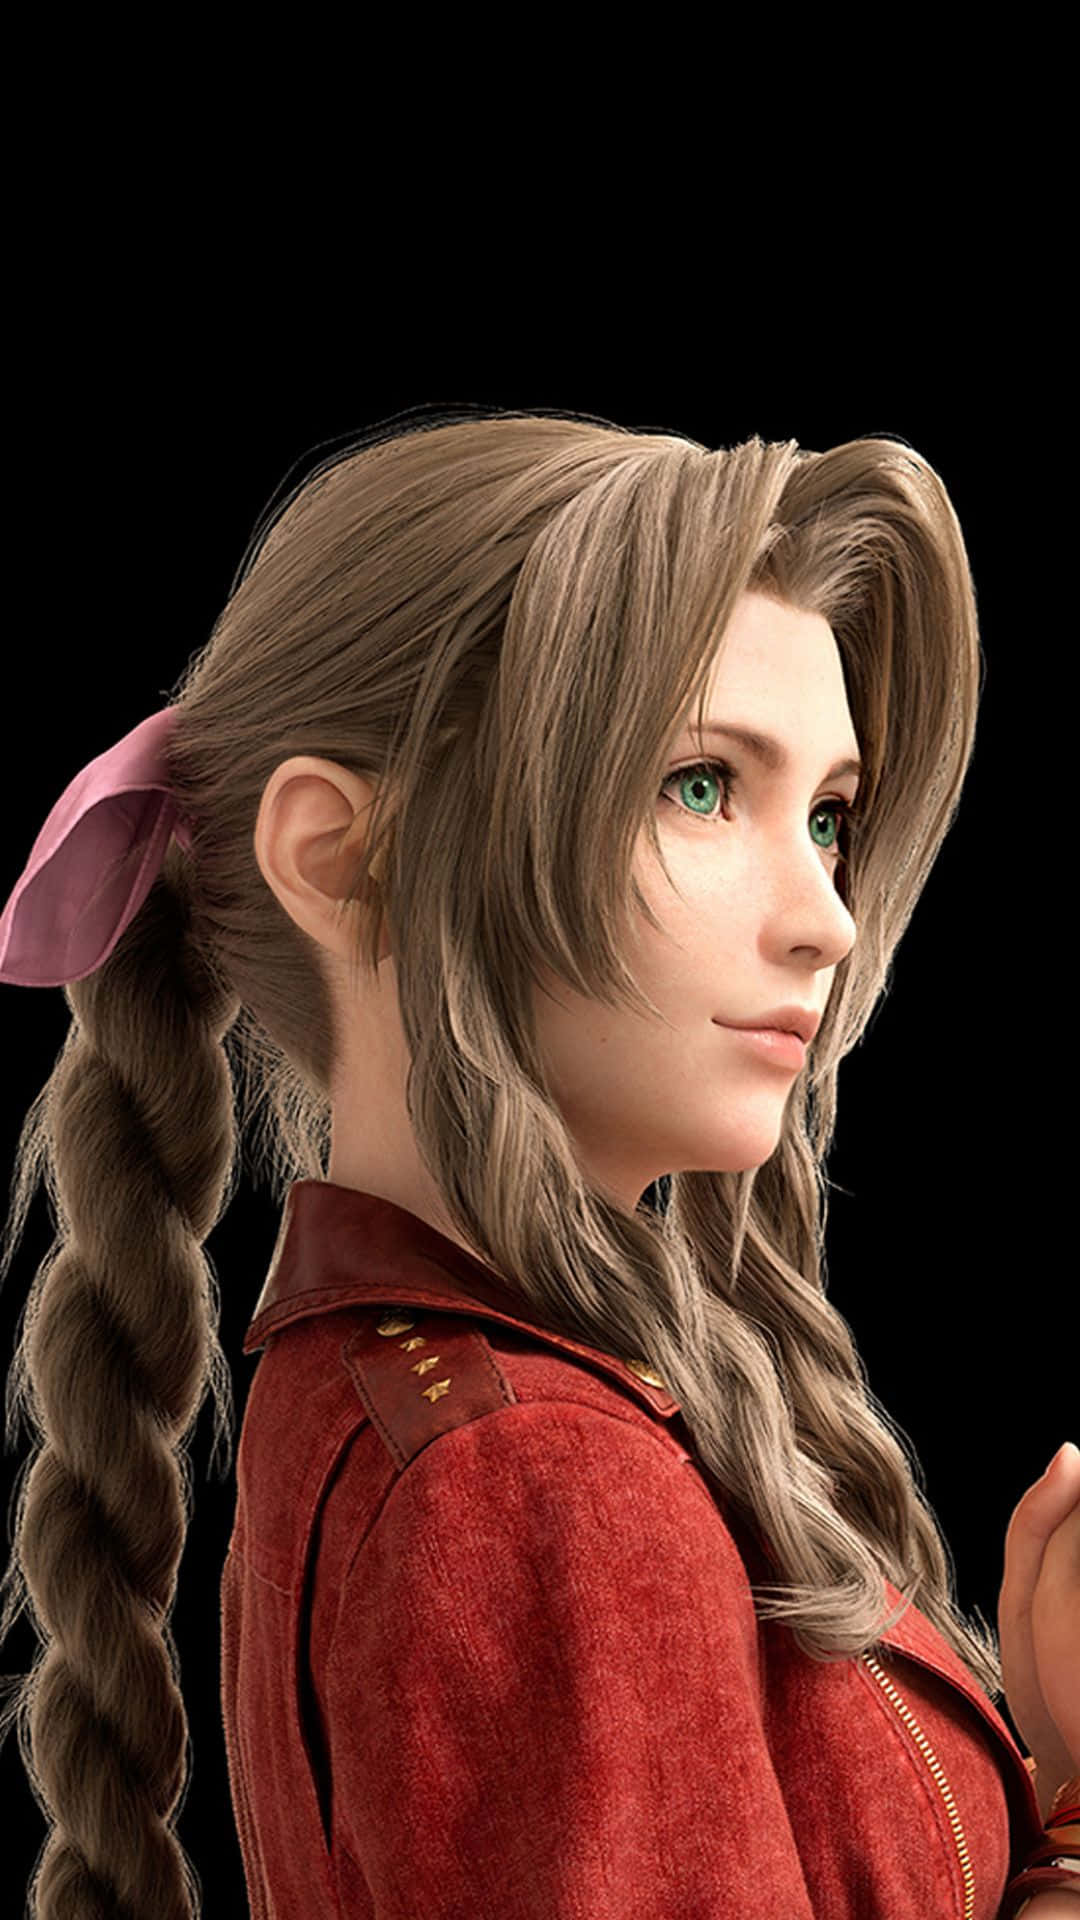 A Touch Of Grace - Aerith Gainsborough Of Final Fantasy Vii Wallpaper